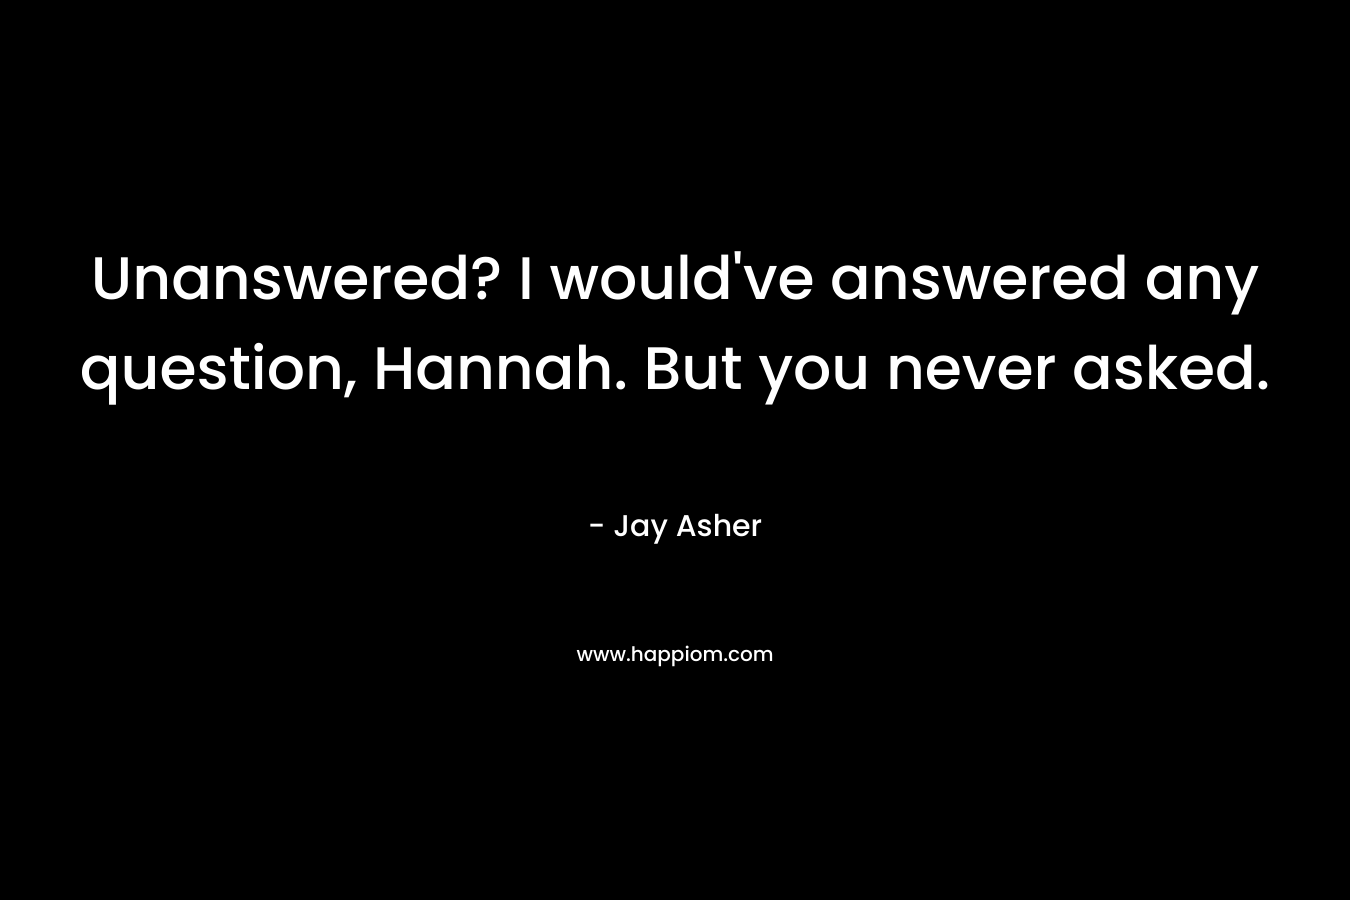 Unanswered? I would’ve answered any question, Hannah. But you never asked. – Jay Asher